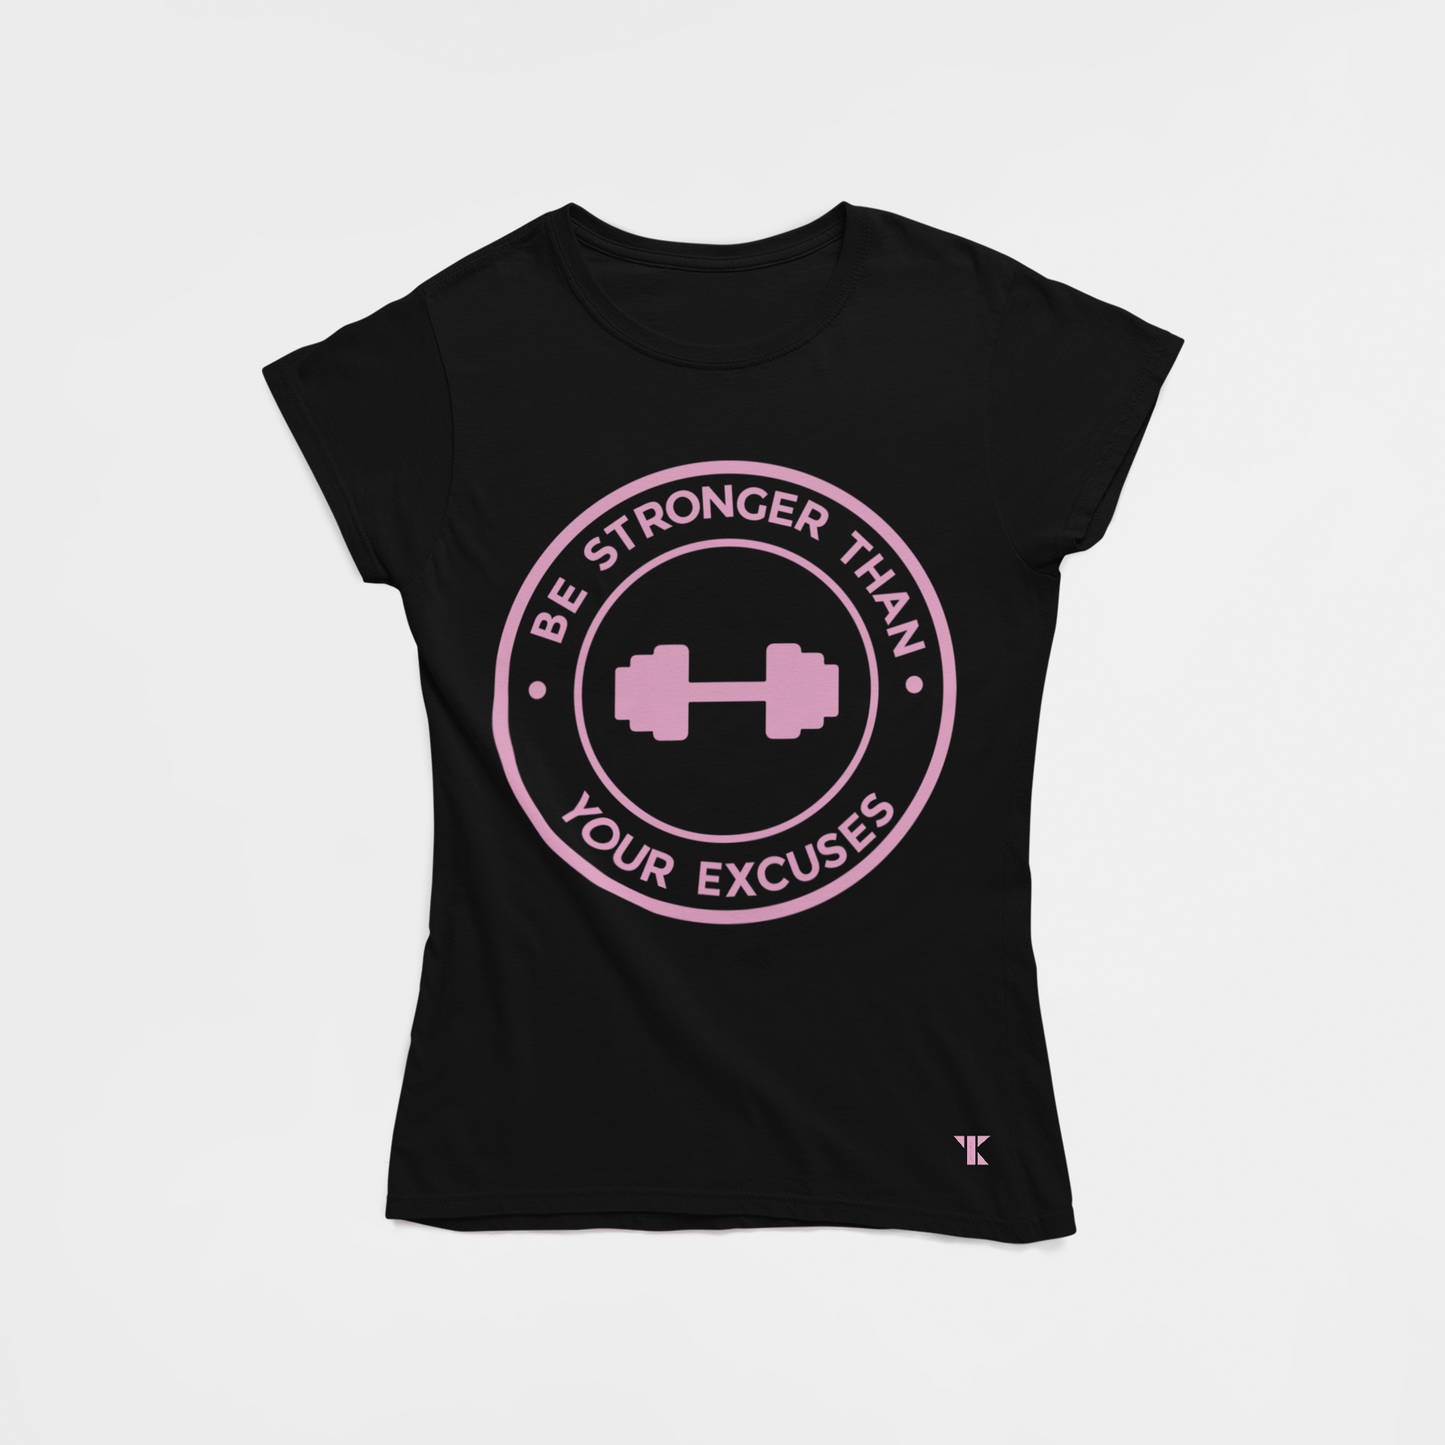 Be Stronger Than Your Excuses Black T-Shirt For Women | Tarun Kapoor Collection